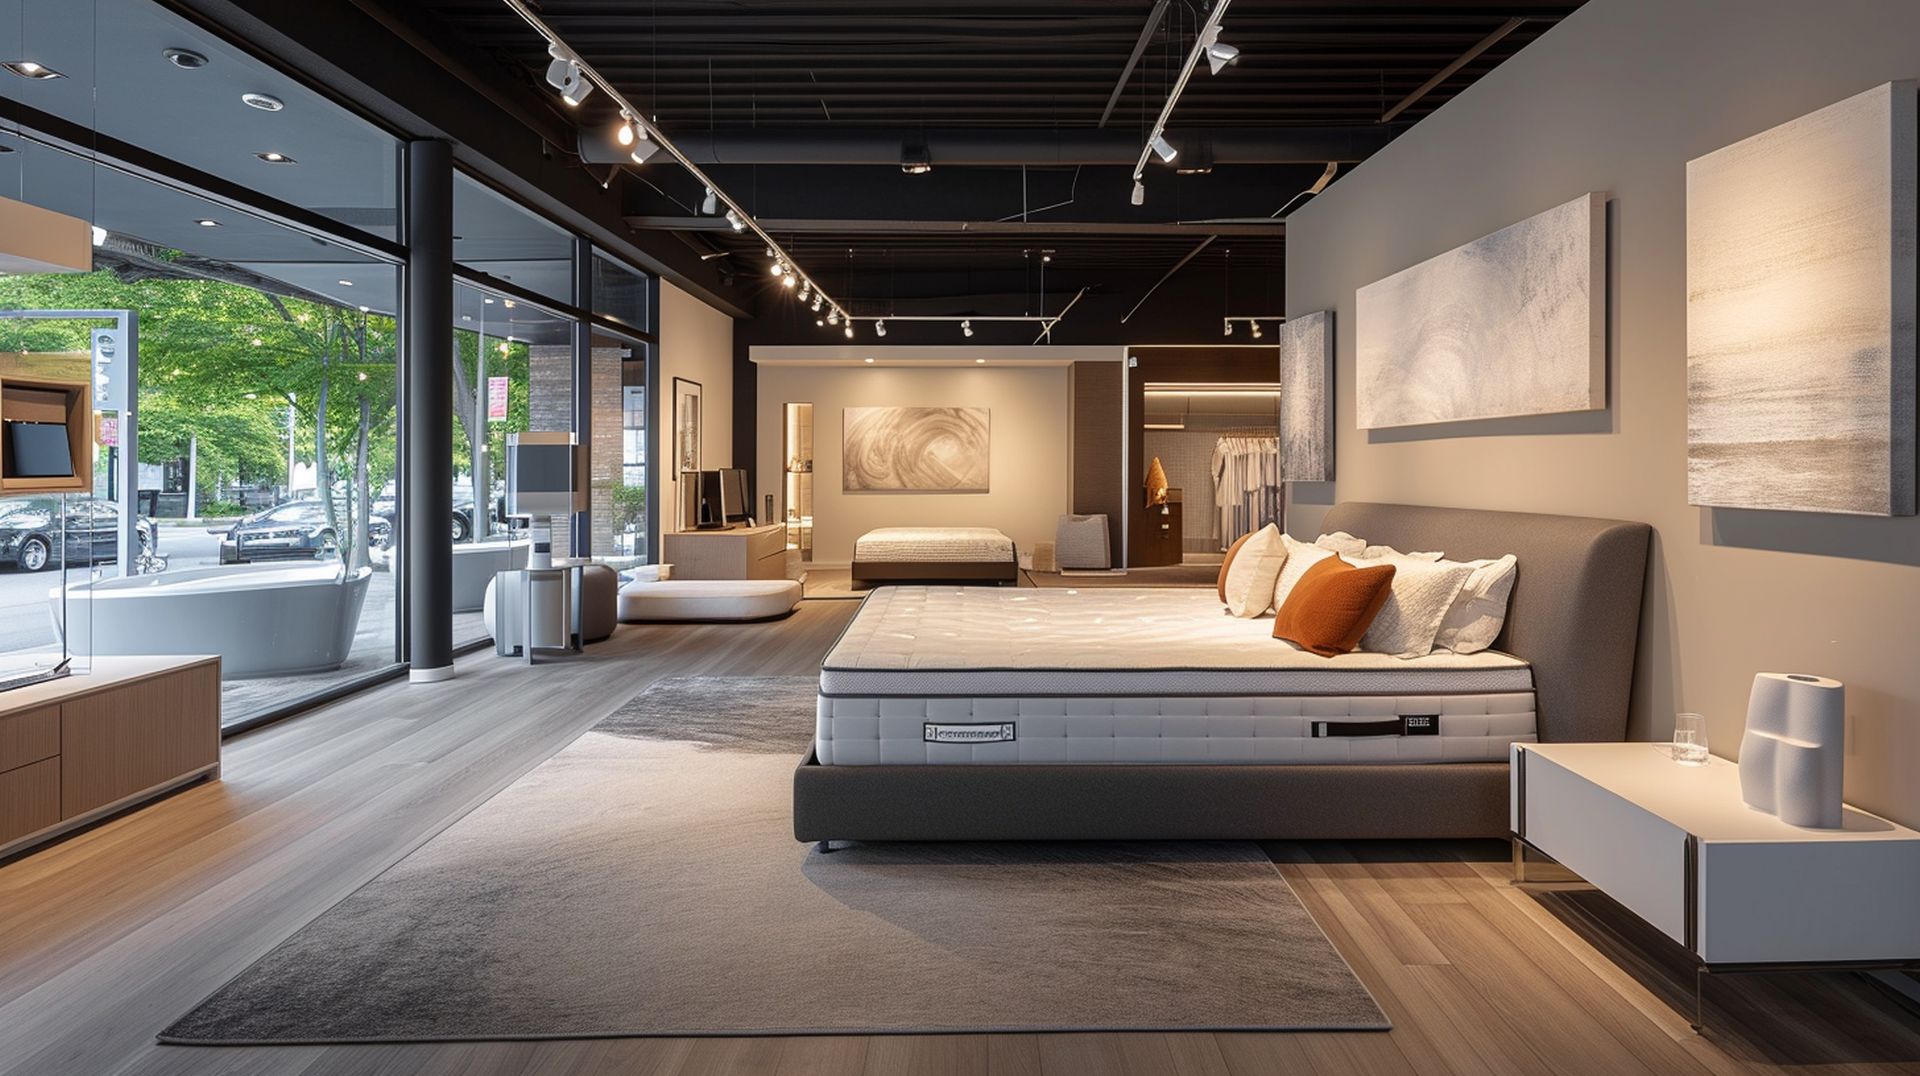 If you're looking for a new bed, mattress stores in Jackson offer the best customer and delivery service, financing, and warranties in New Jersey